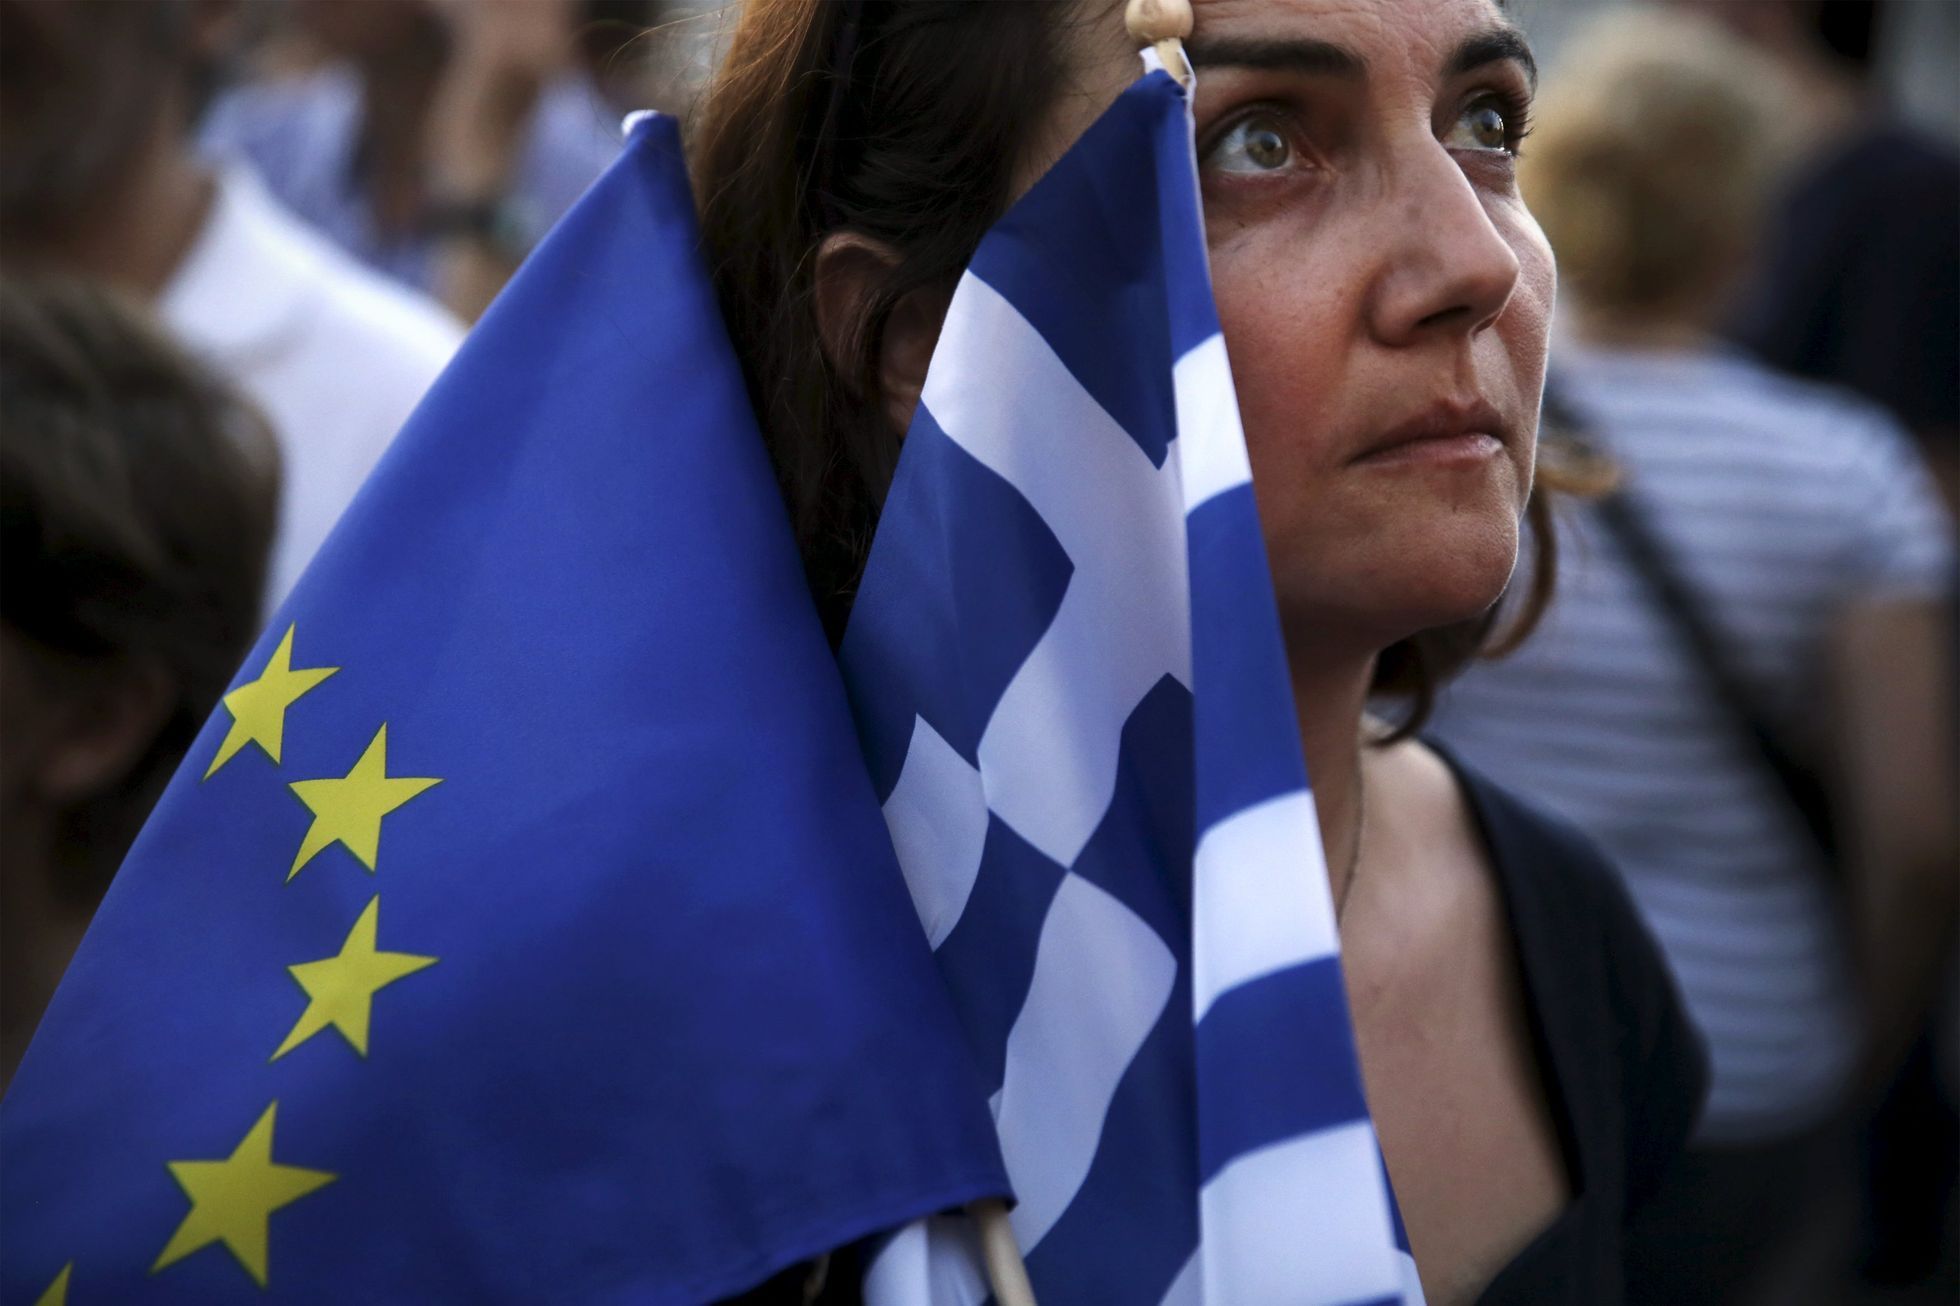 Řecko A pro-Euro protester holds a European Union and a Greek national flag during a rally in front of the parliament building in Athens